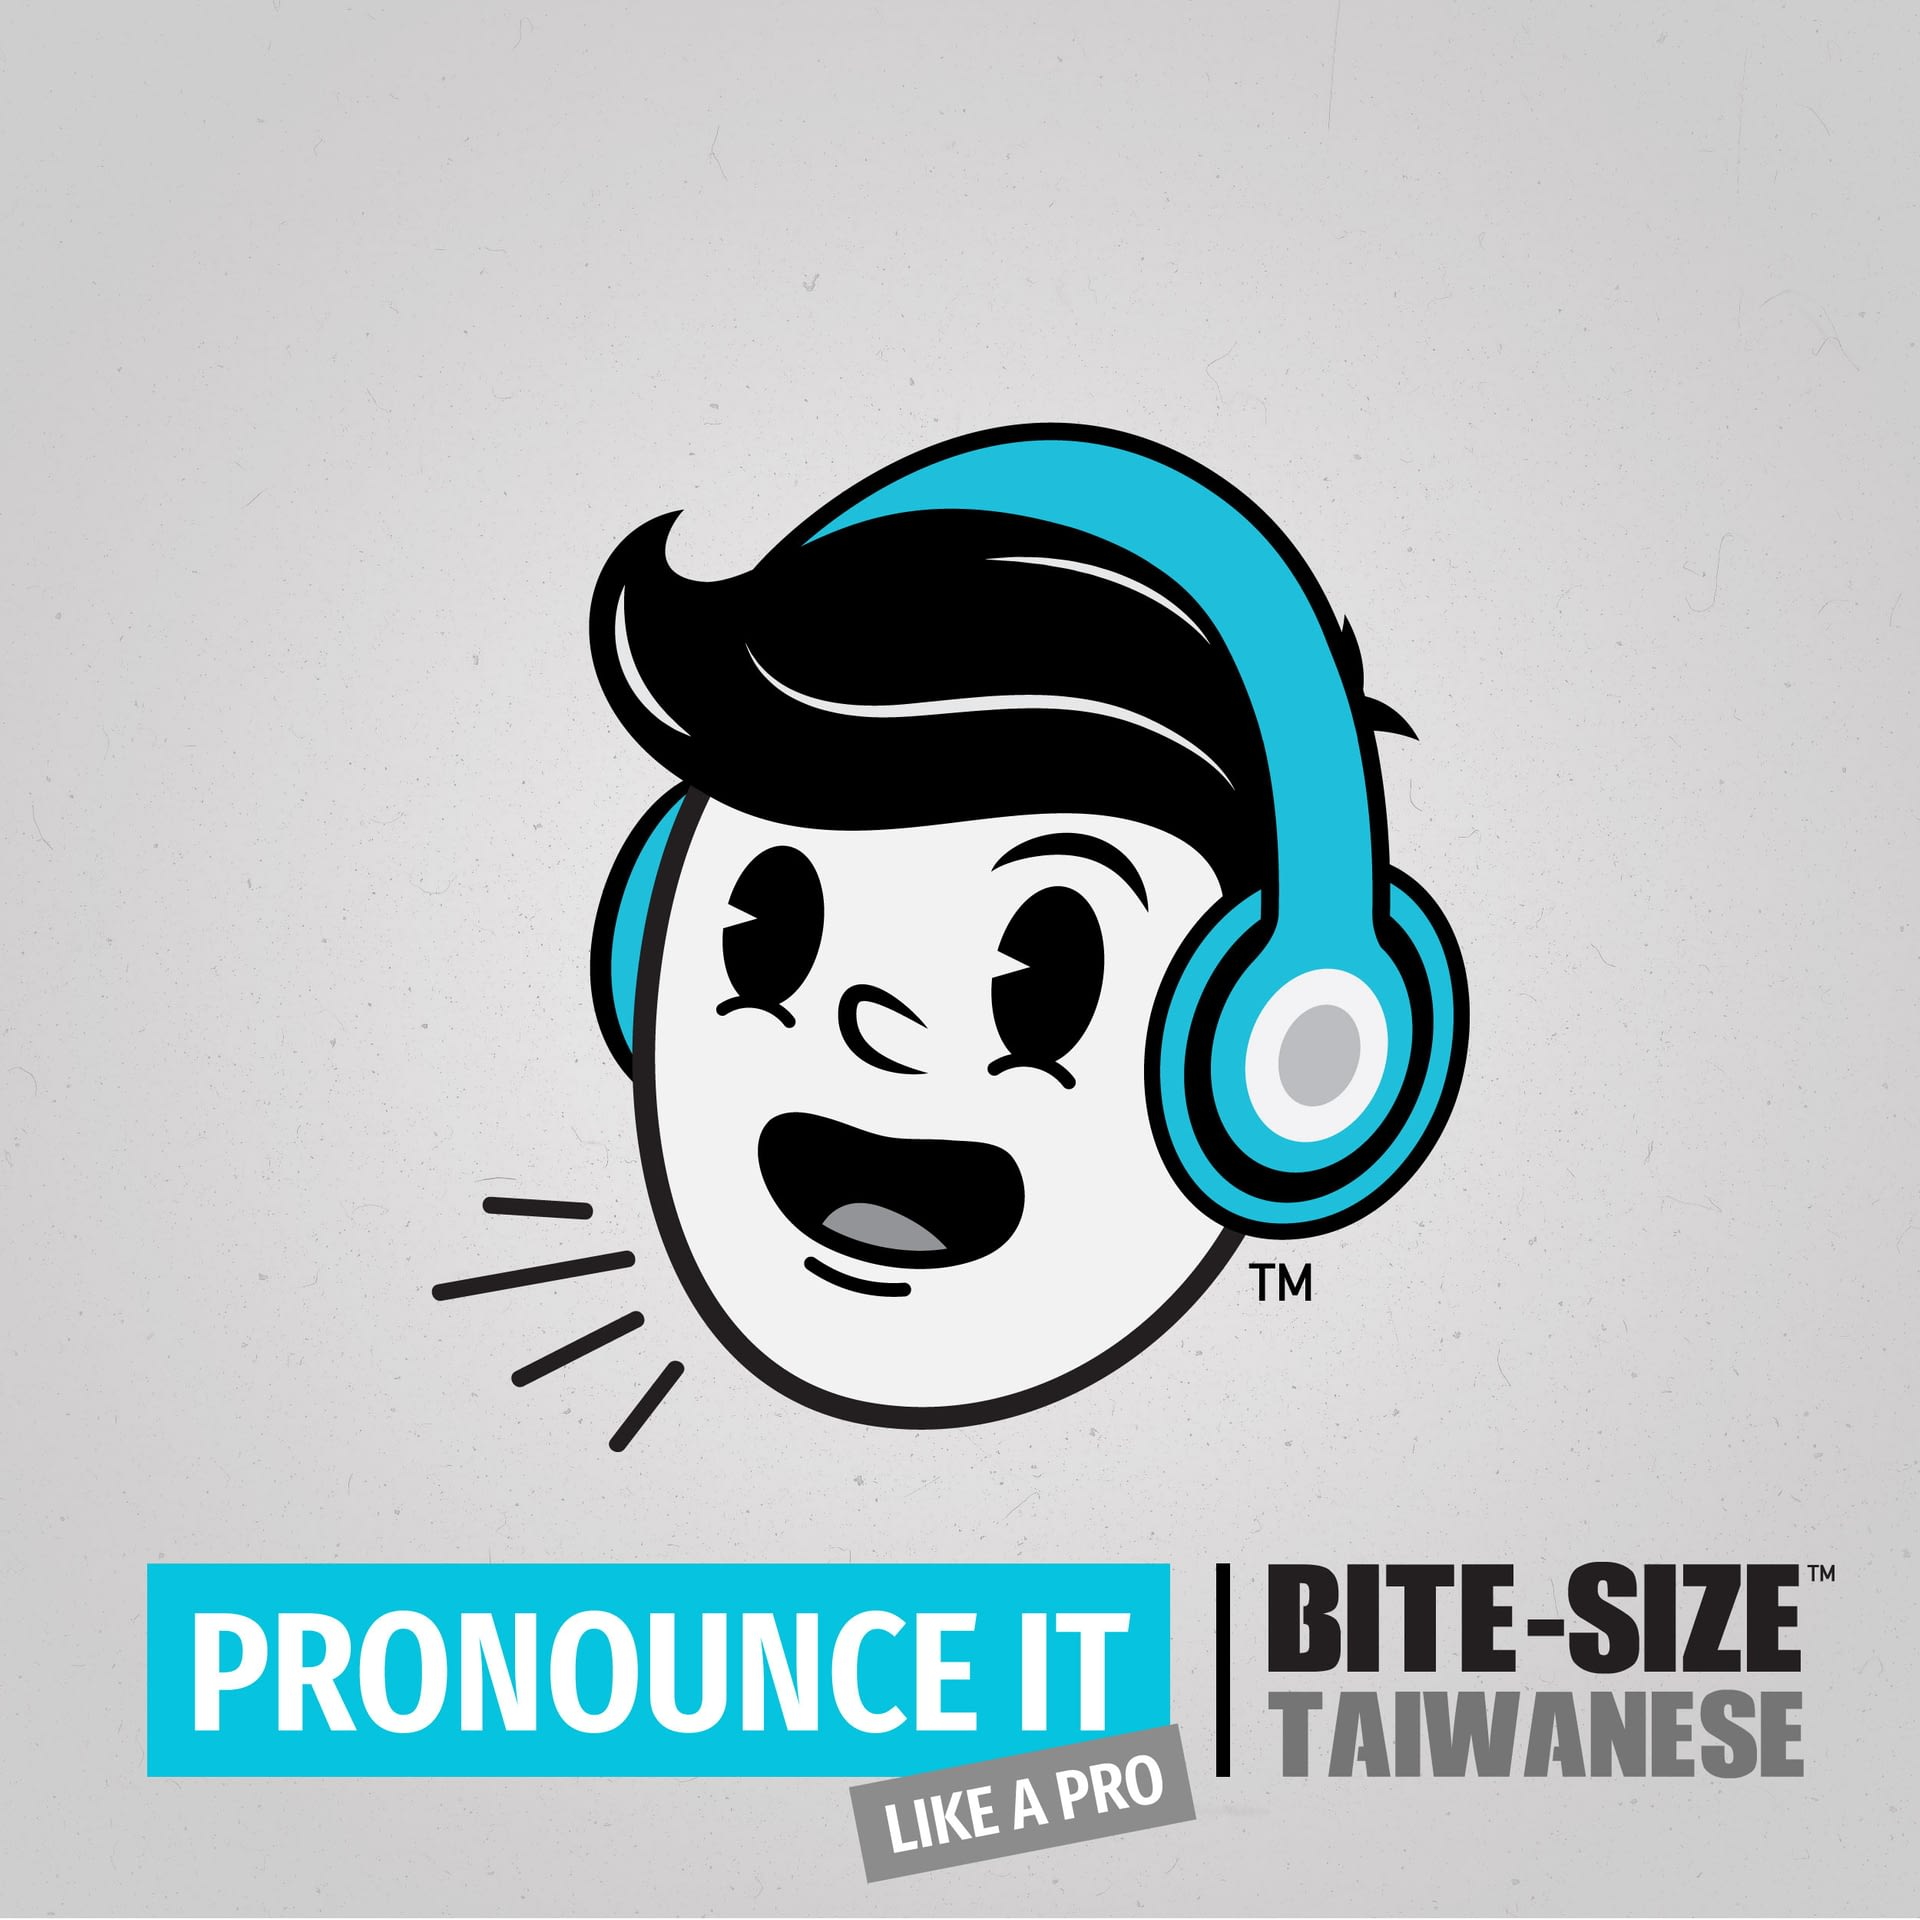 TRAILER: Introducing Bite-size Taiwanese